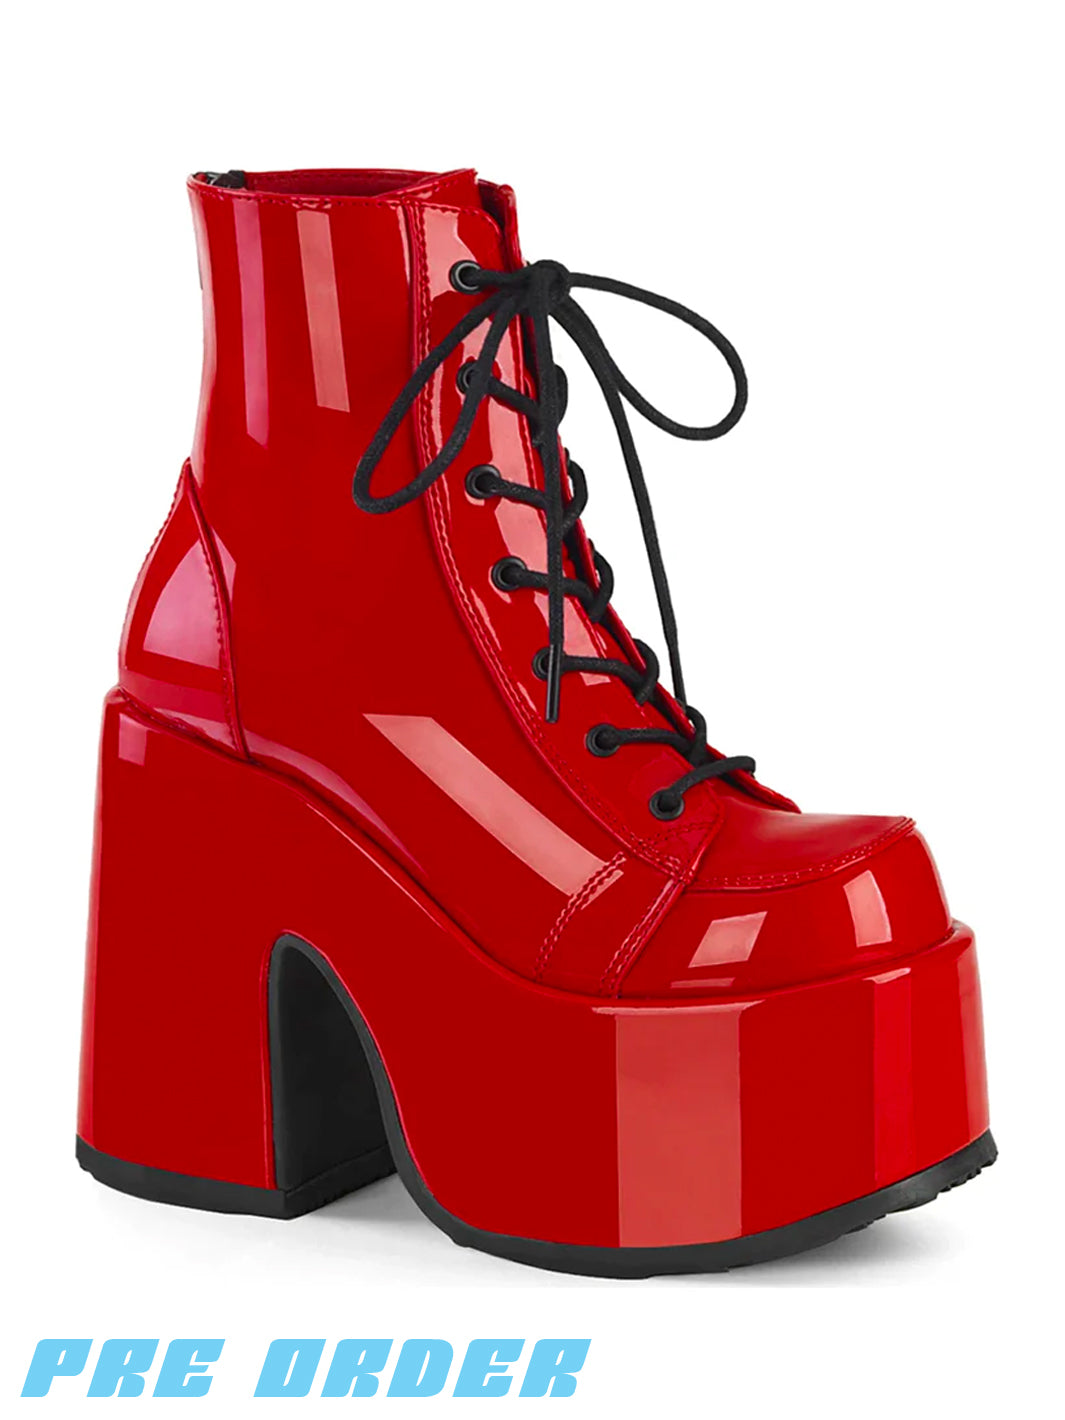 DEMONIA CAMEL-203 BOOTS - PATENT RED ✰ PRE ORDER ✰